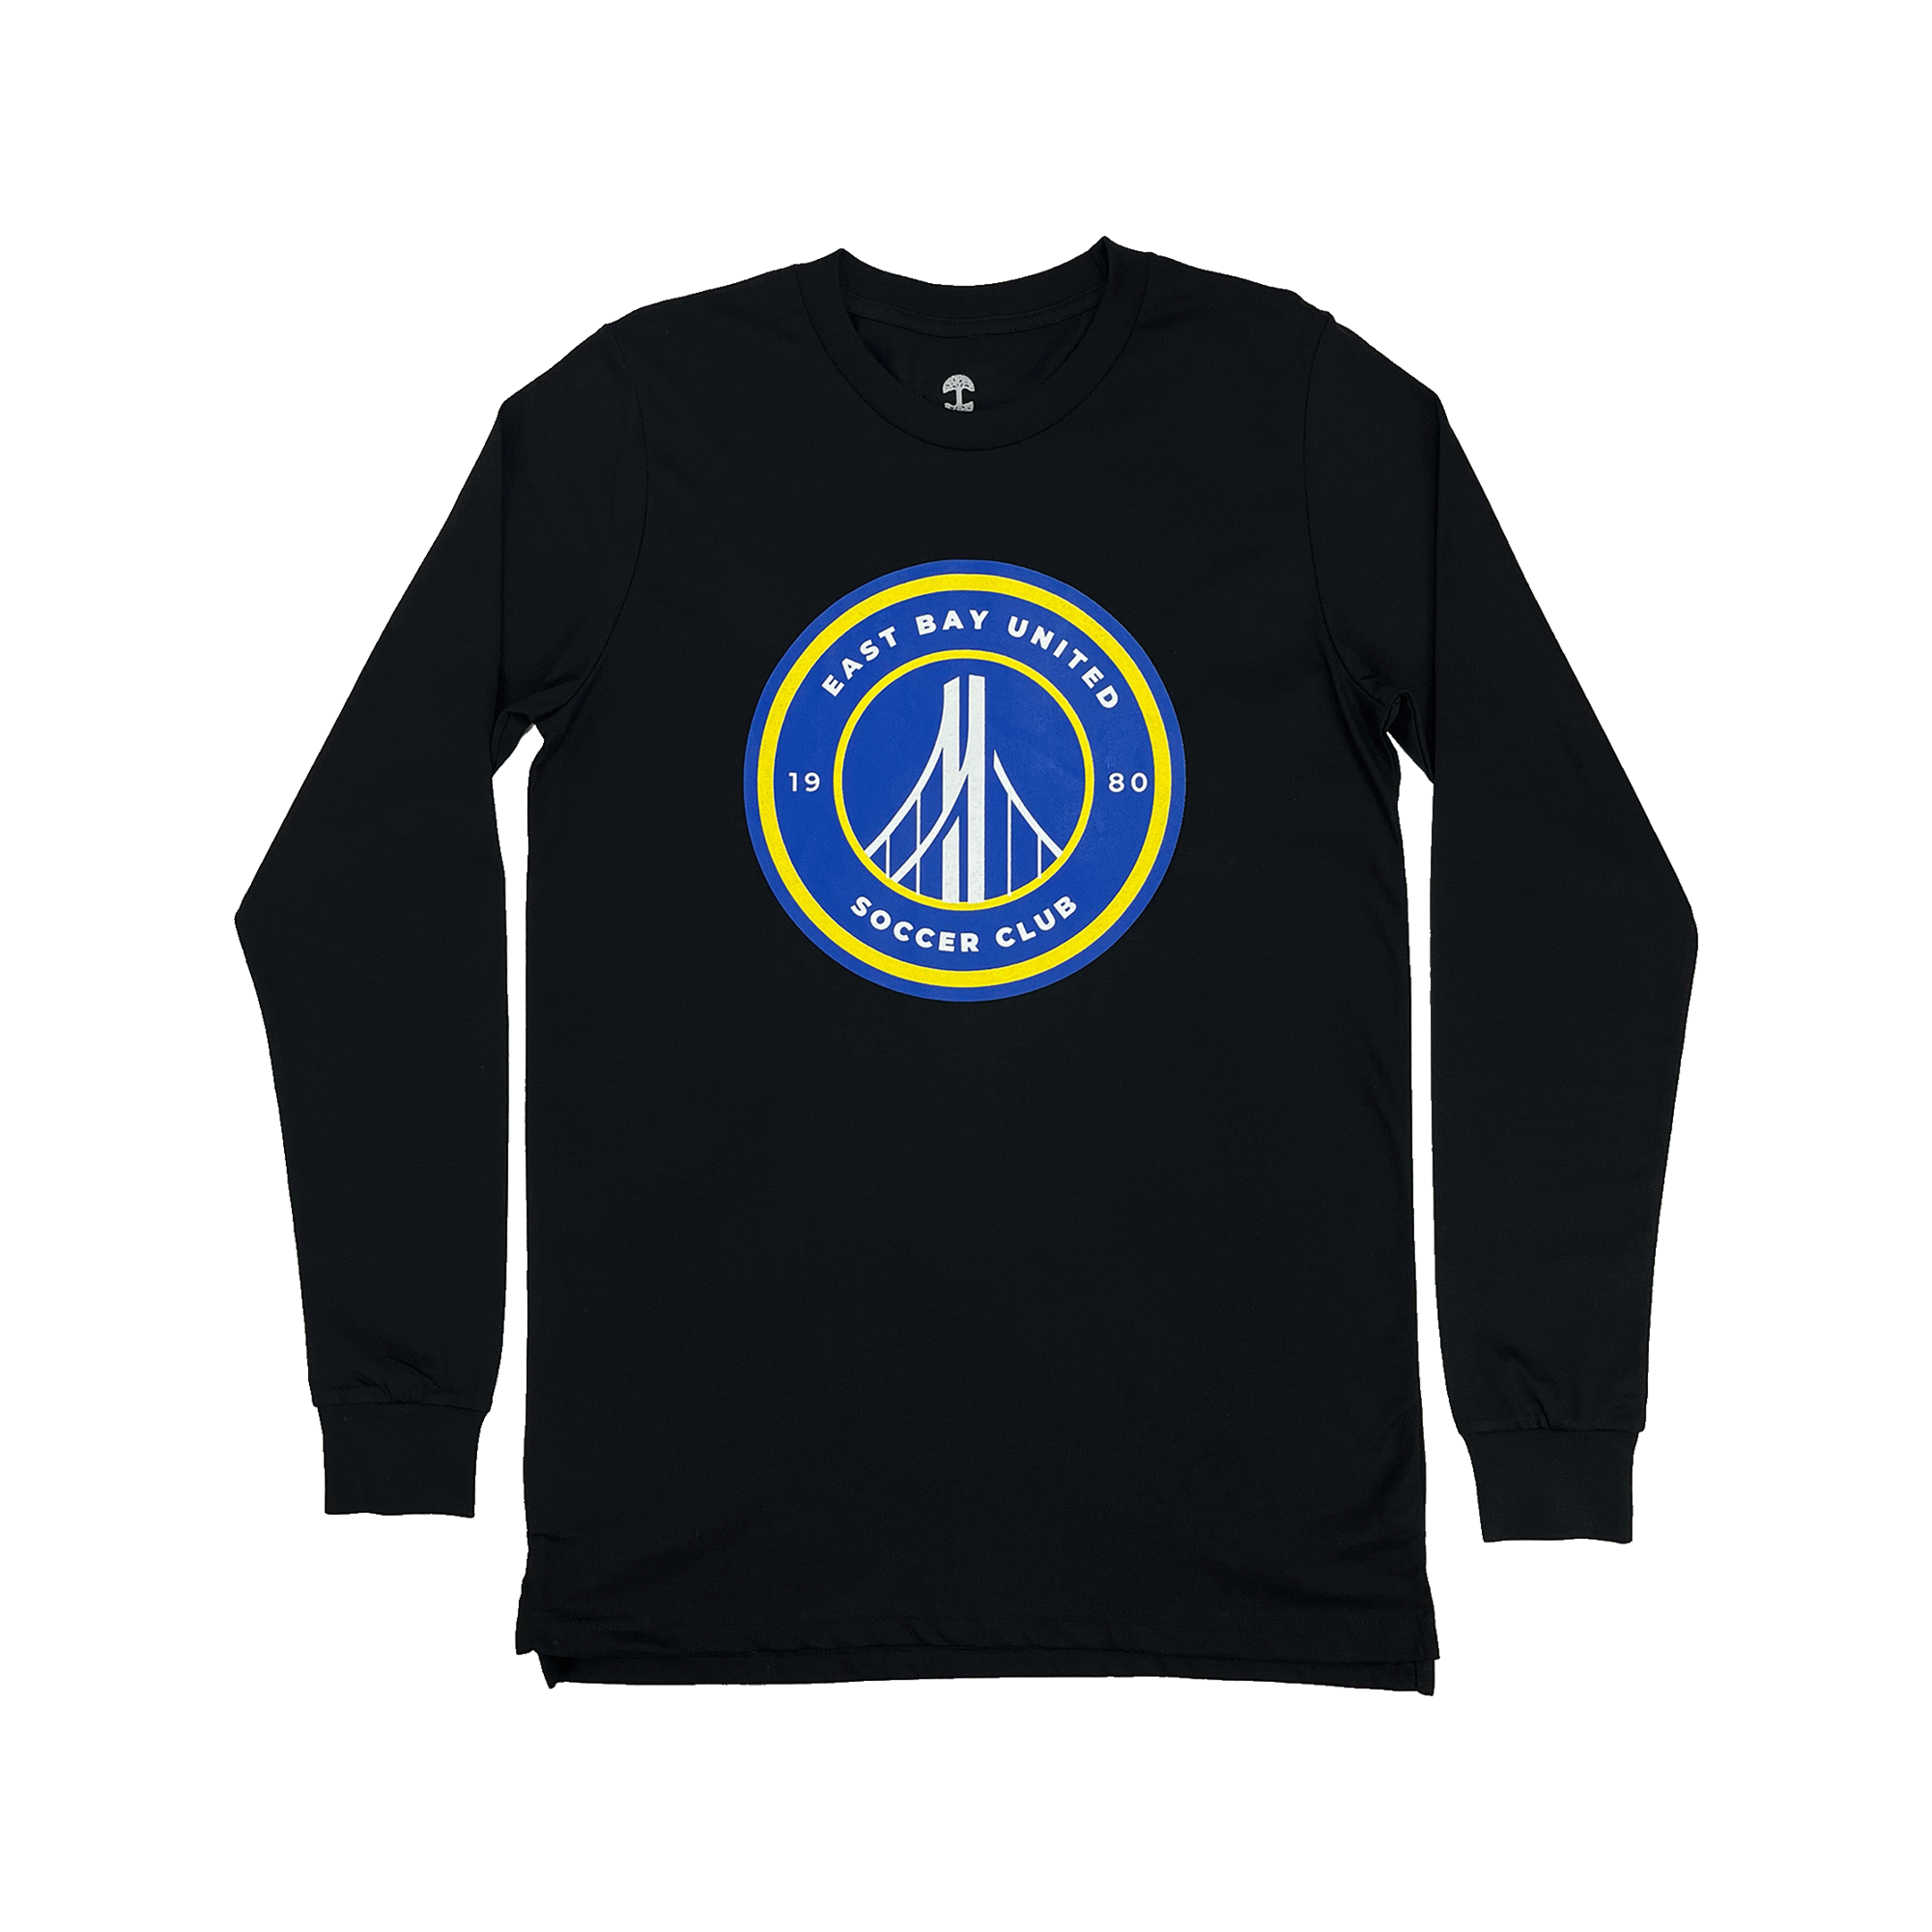 Front view of black long-sleeve t-shirt with round blue, white, and yellow East Bay United Soccer Club 1980 logo on the front chest.